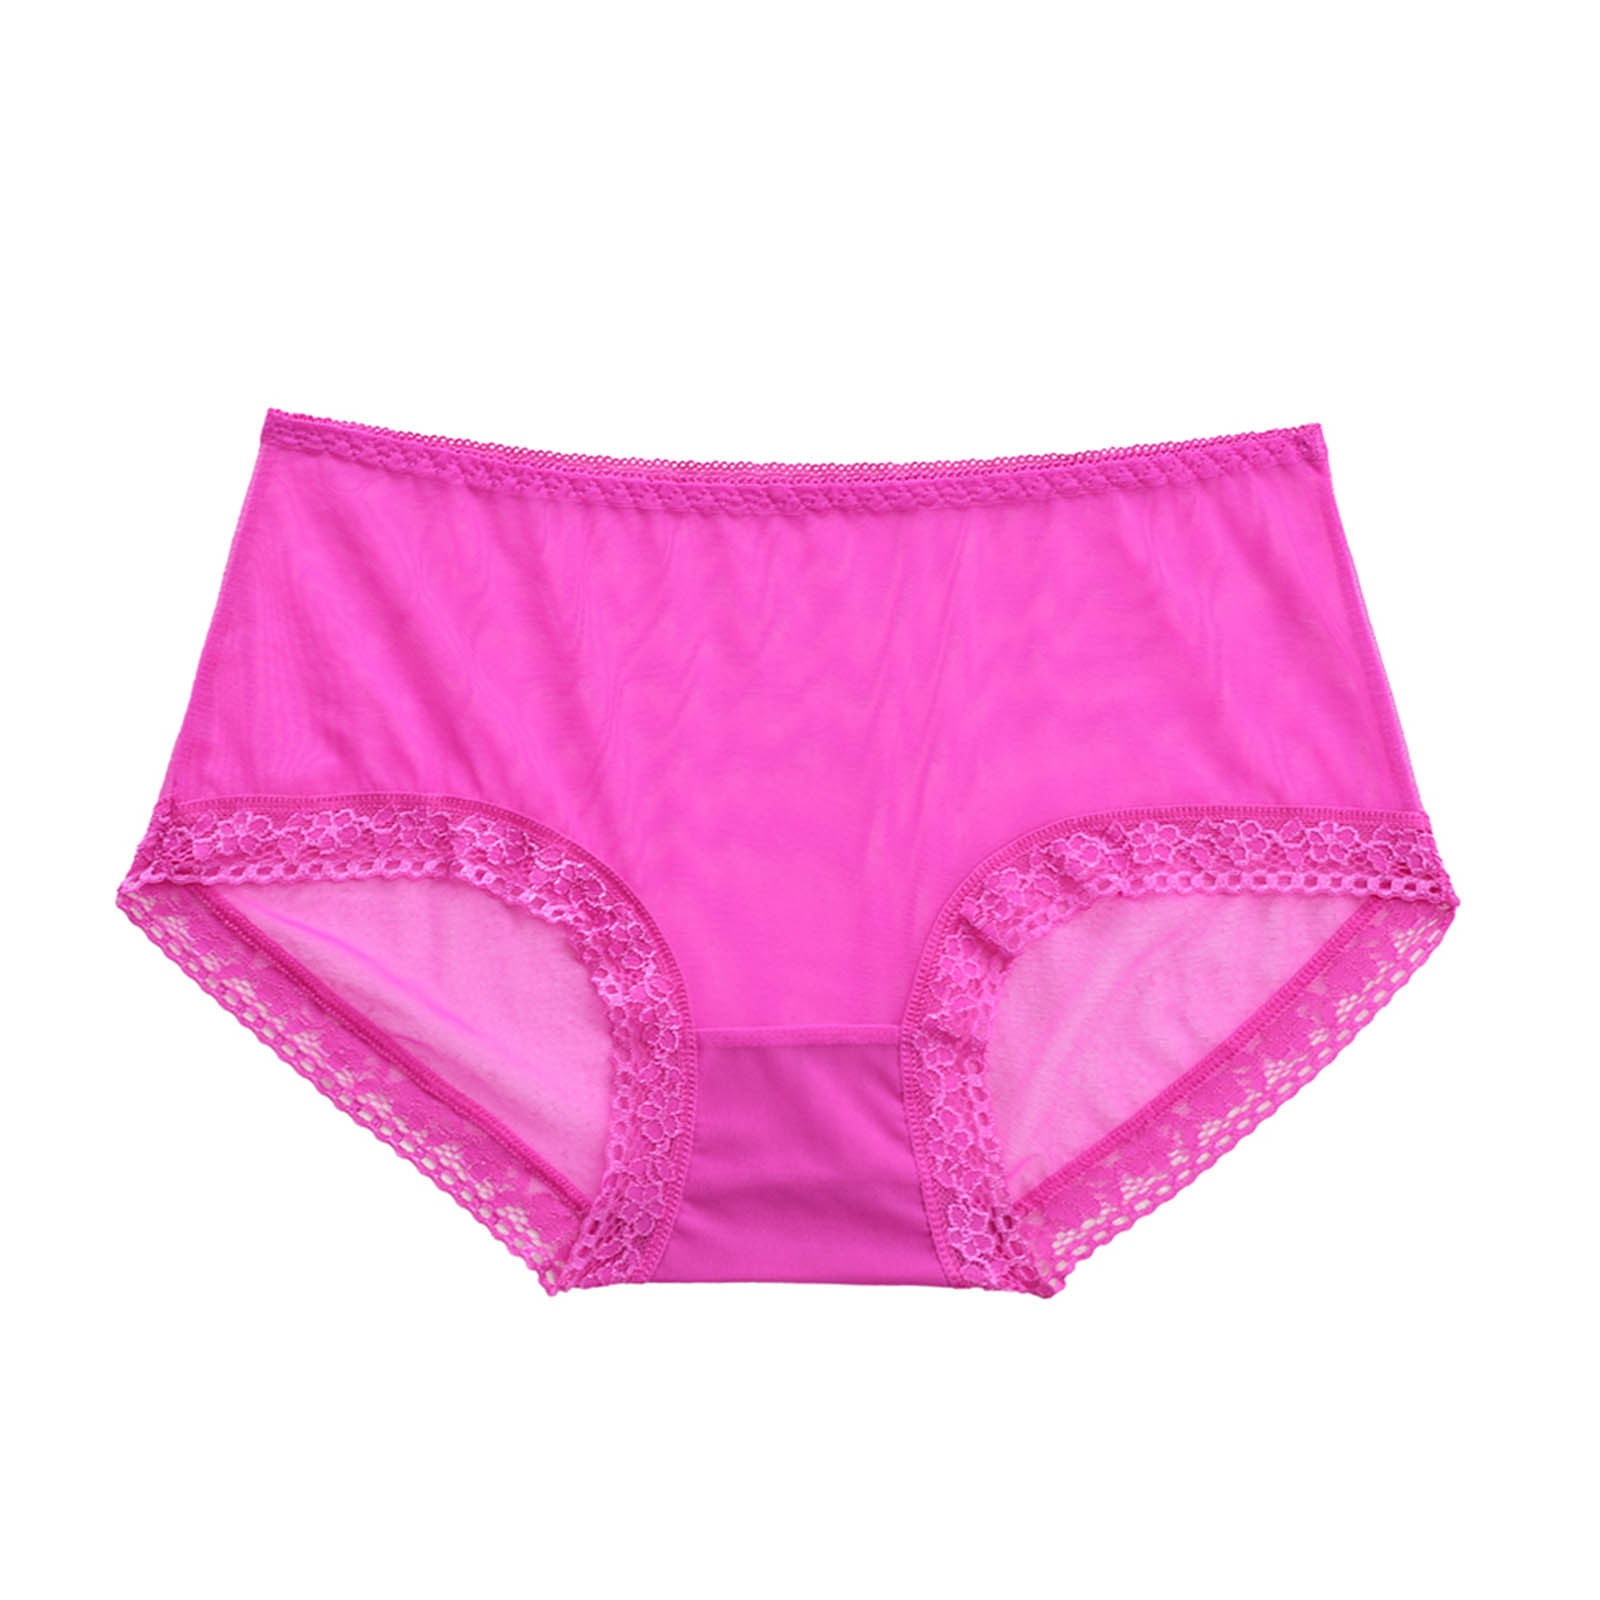 adviicd Panties for Women Pack High Waist Women's Perfectly Yours Classic  Cotton Brief Panty Hot Pink Medium